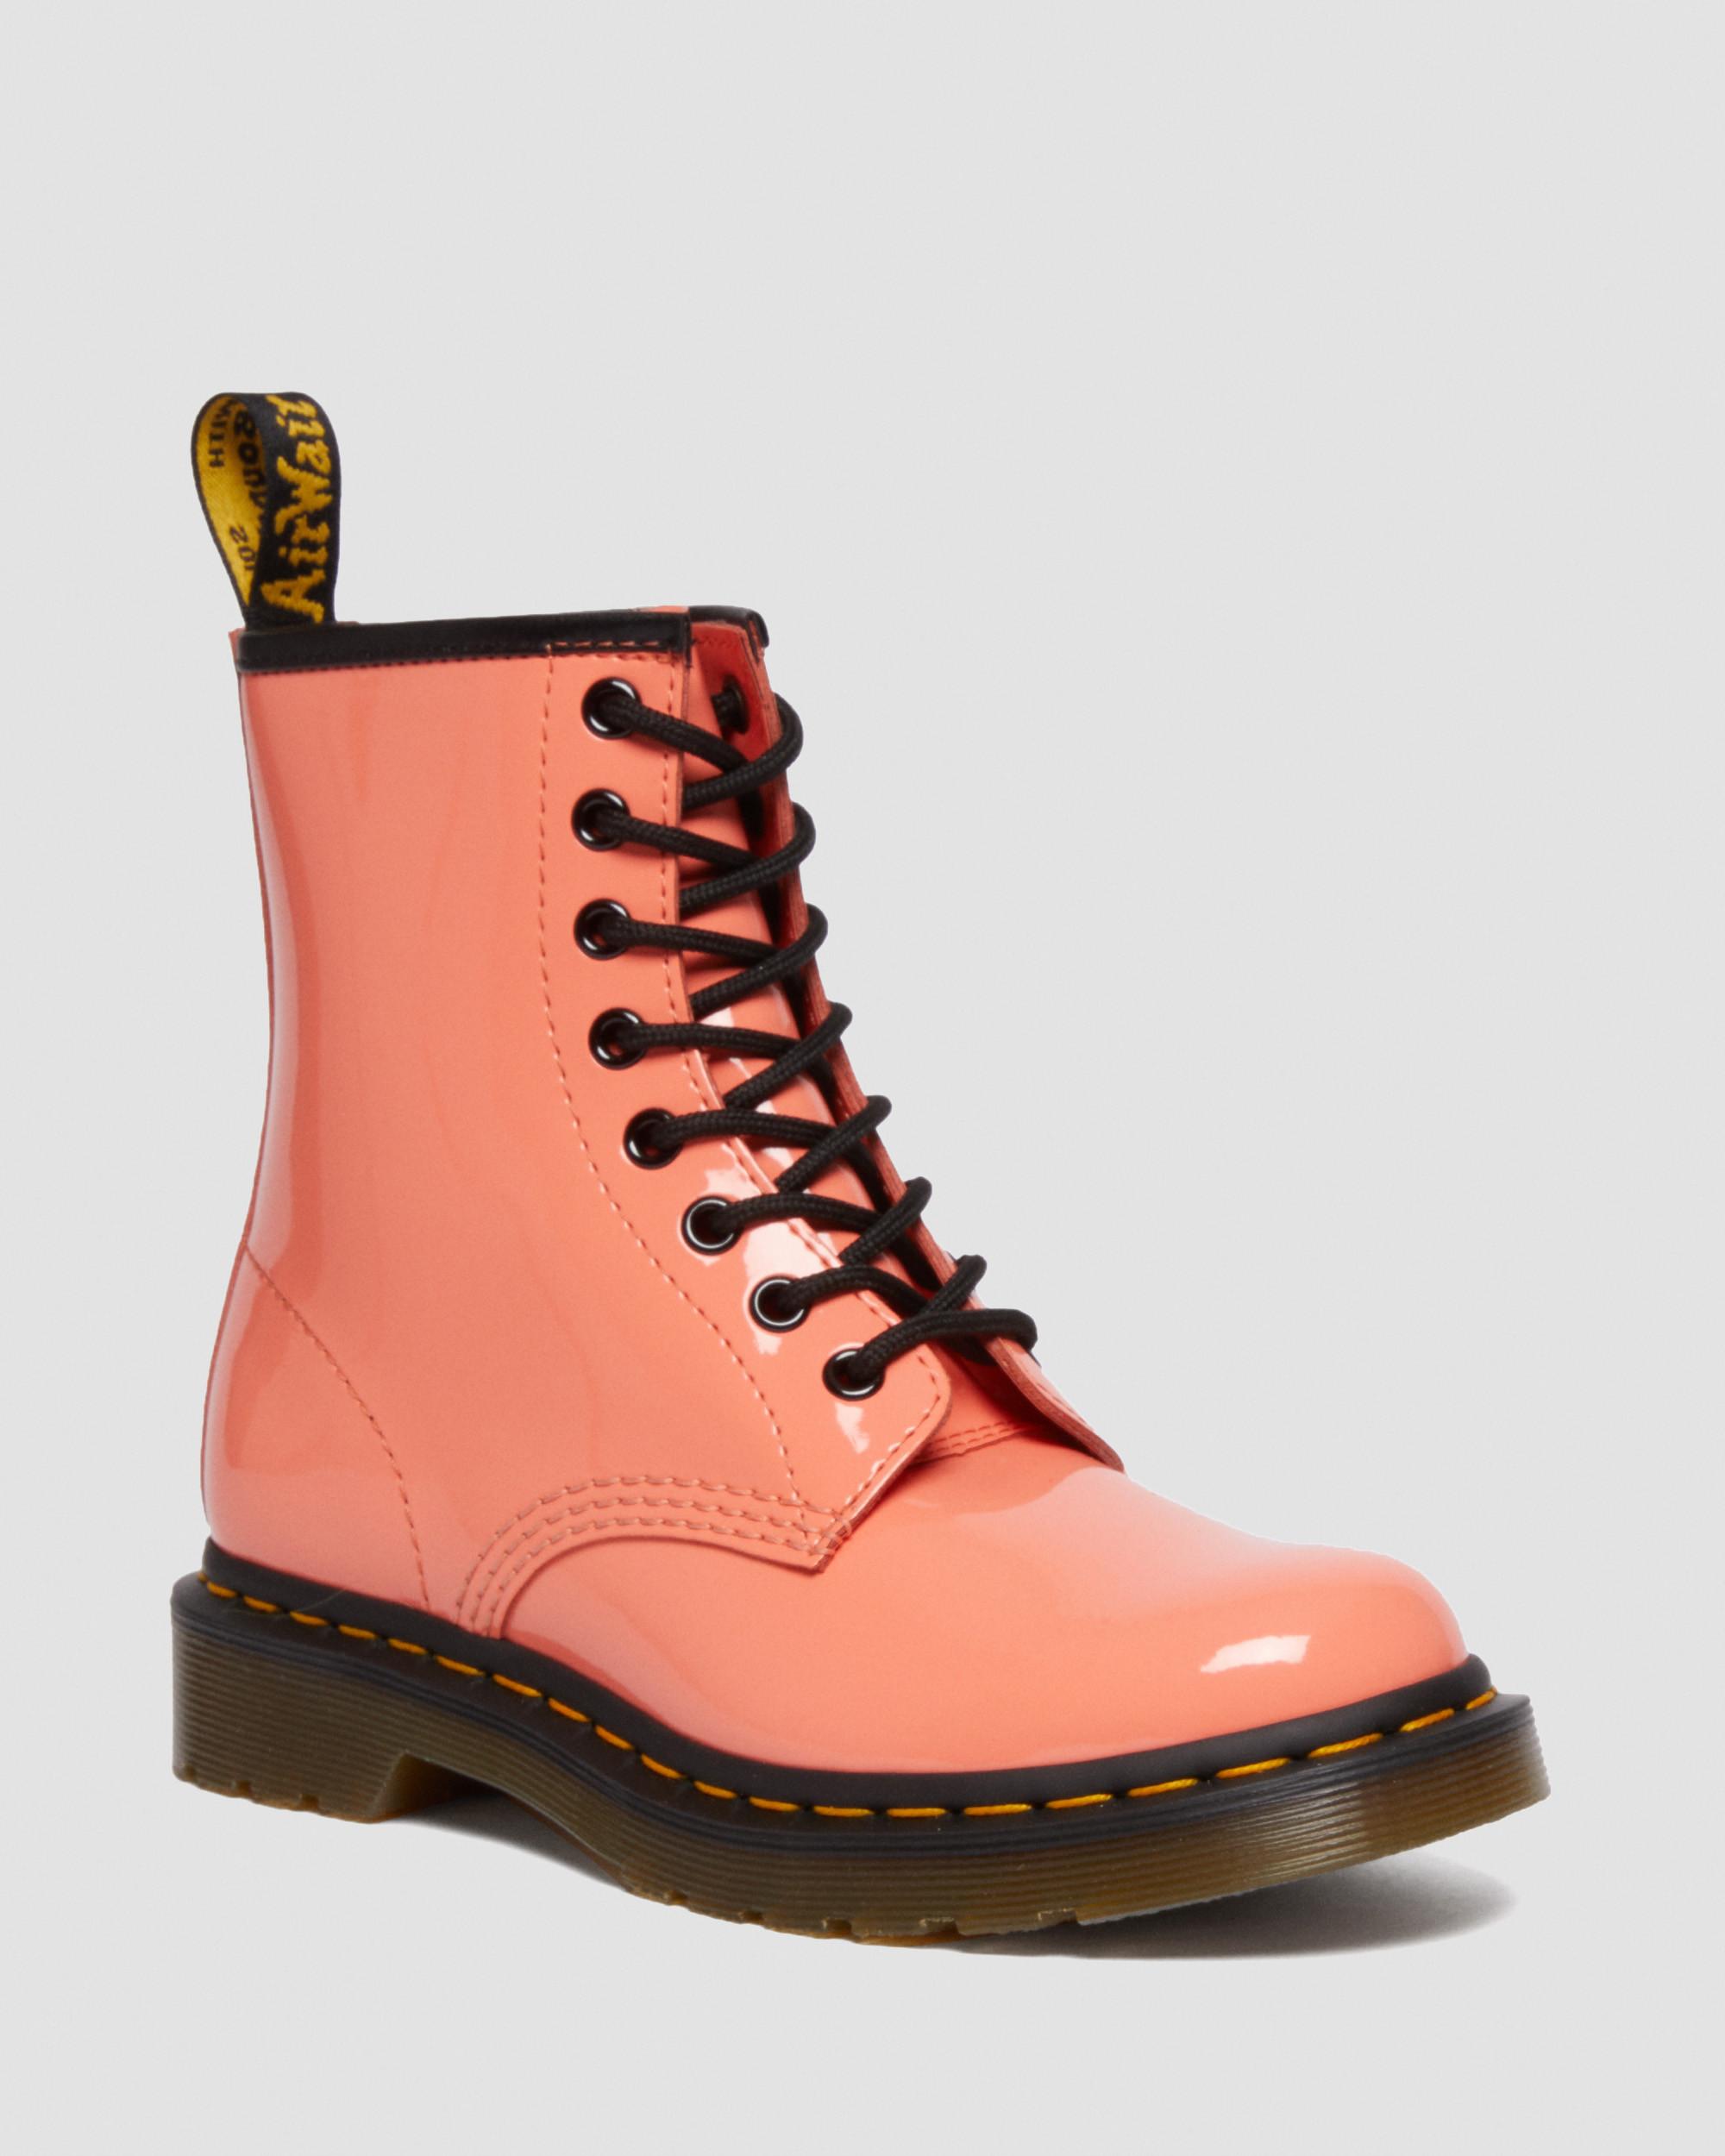 1460 Women's Patent Leather Lace Up Boots in Coral | Dr. Martens